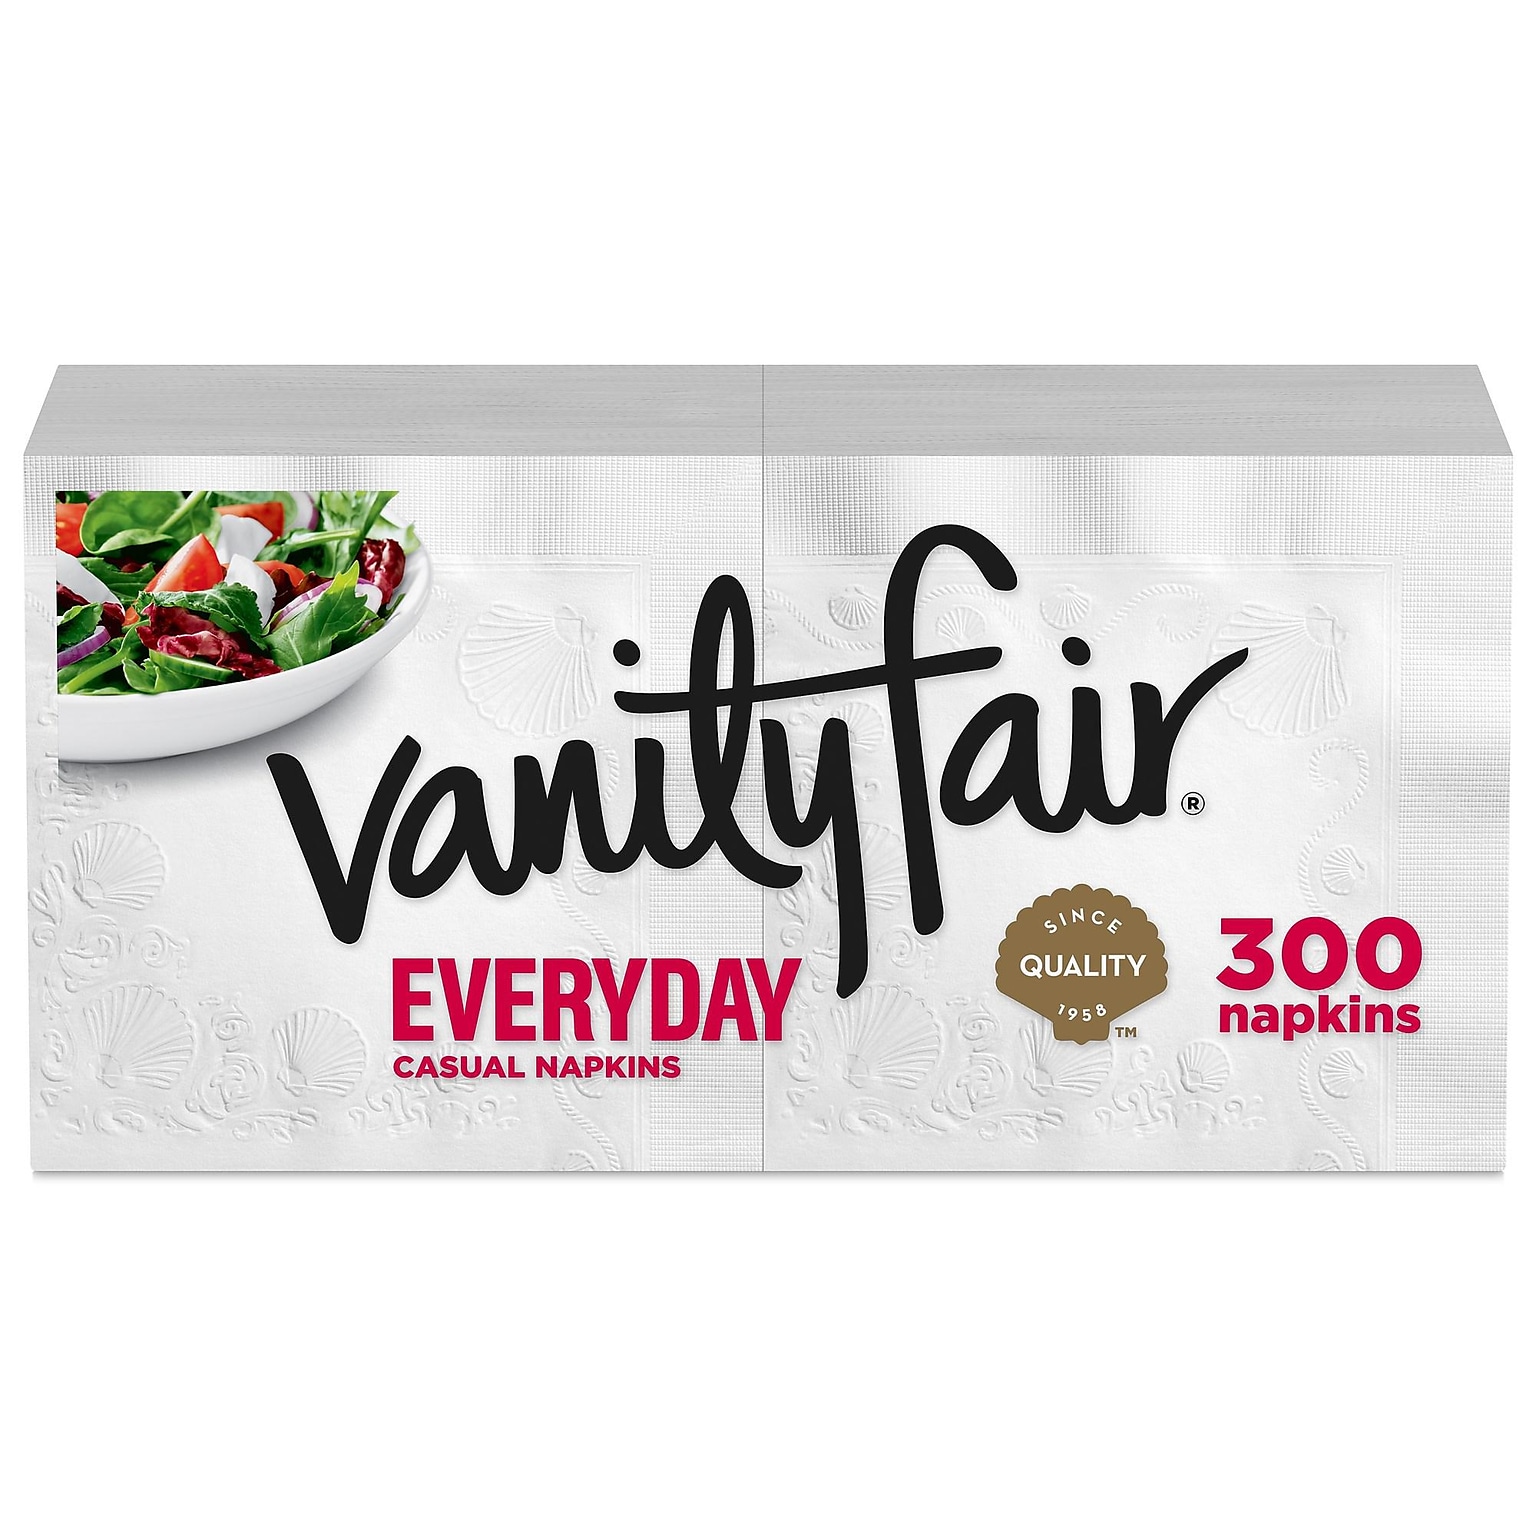 Vanity Fair Everyday Luncheon Napkins, 2-Ply, White, 300/Pack (35503/14)